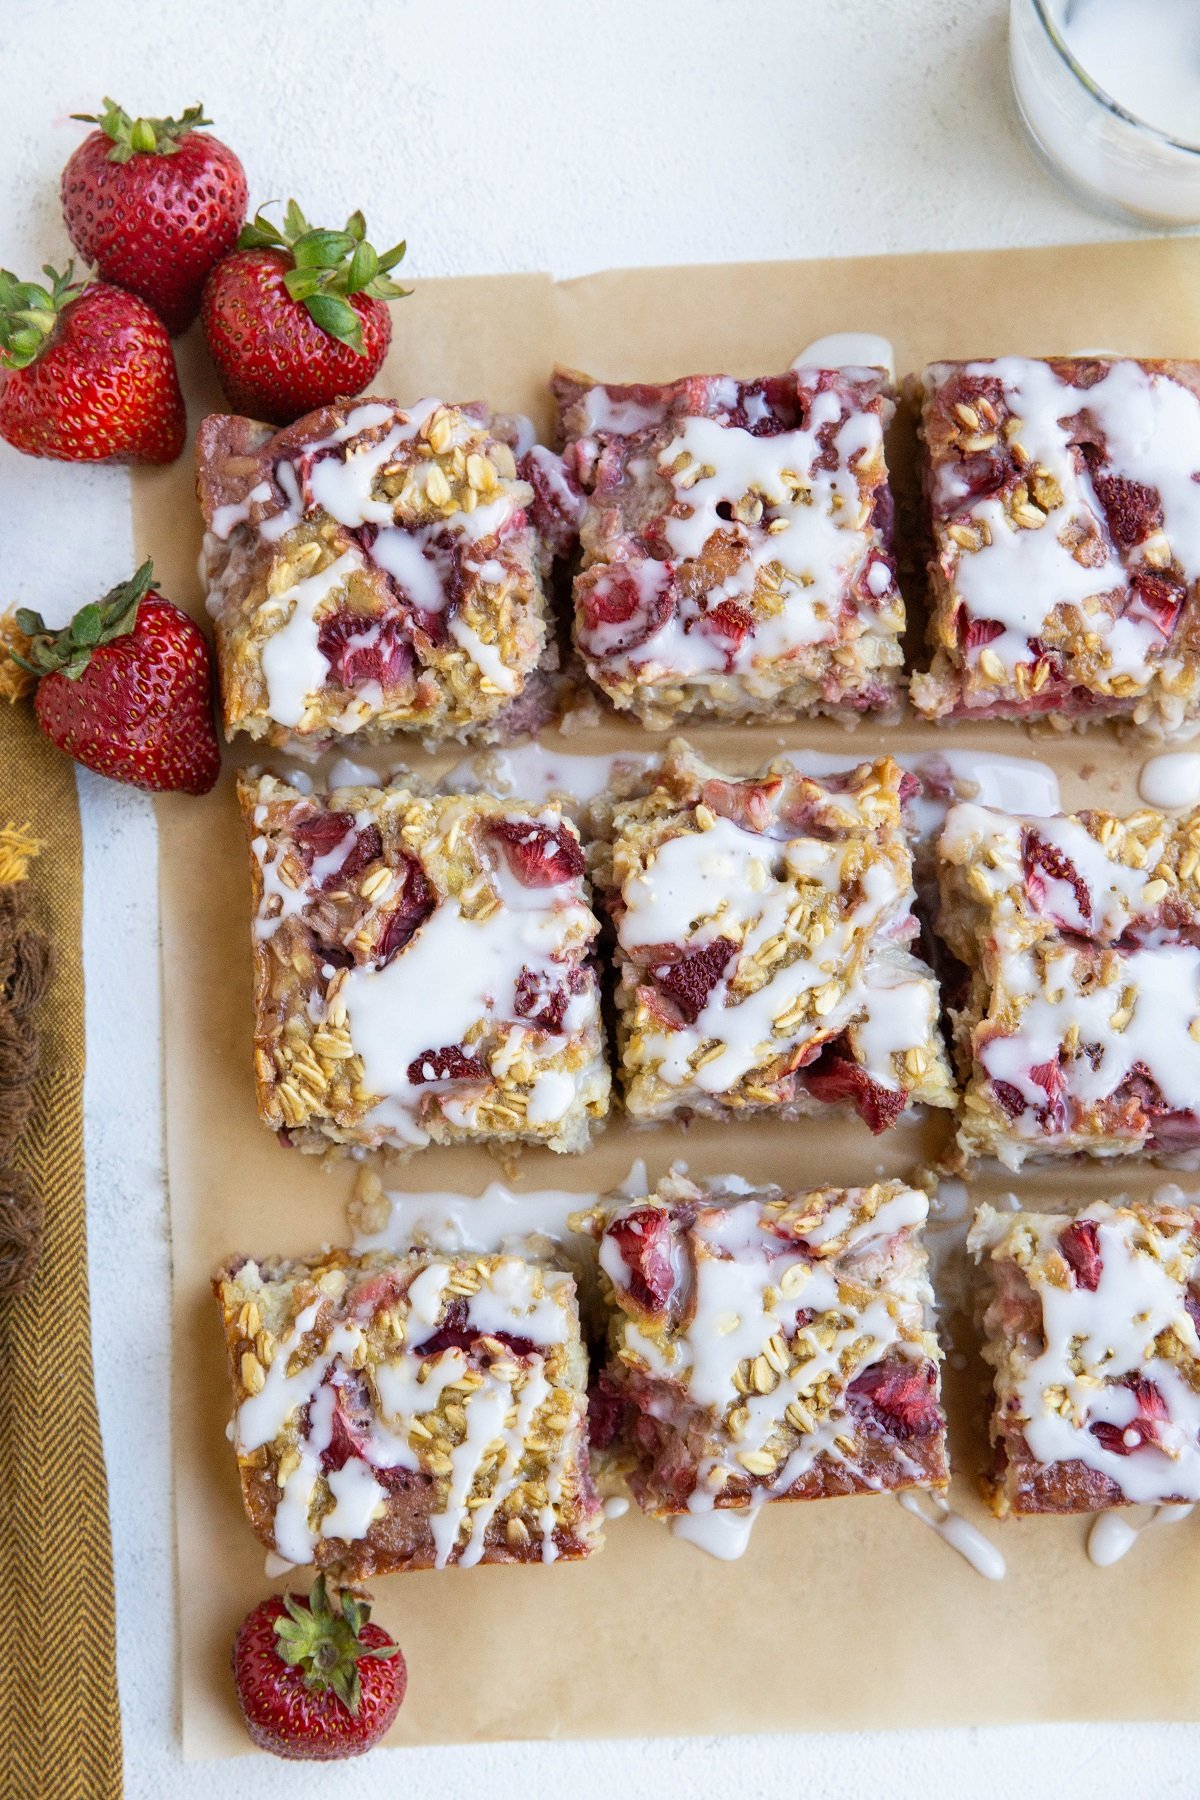 Slices of baked oatmeal on a sheet of parchment paper. Fresh strawberries and a napkin to the side.